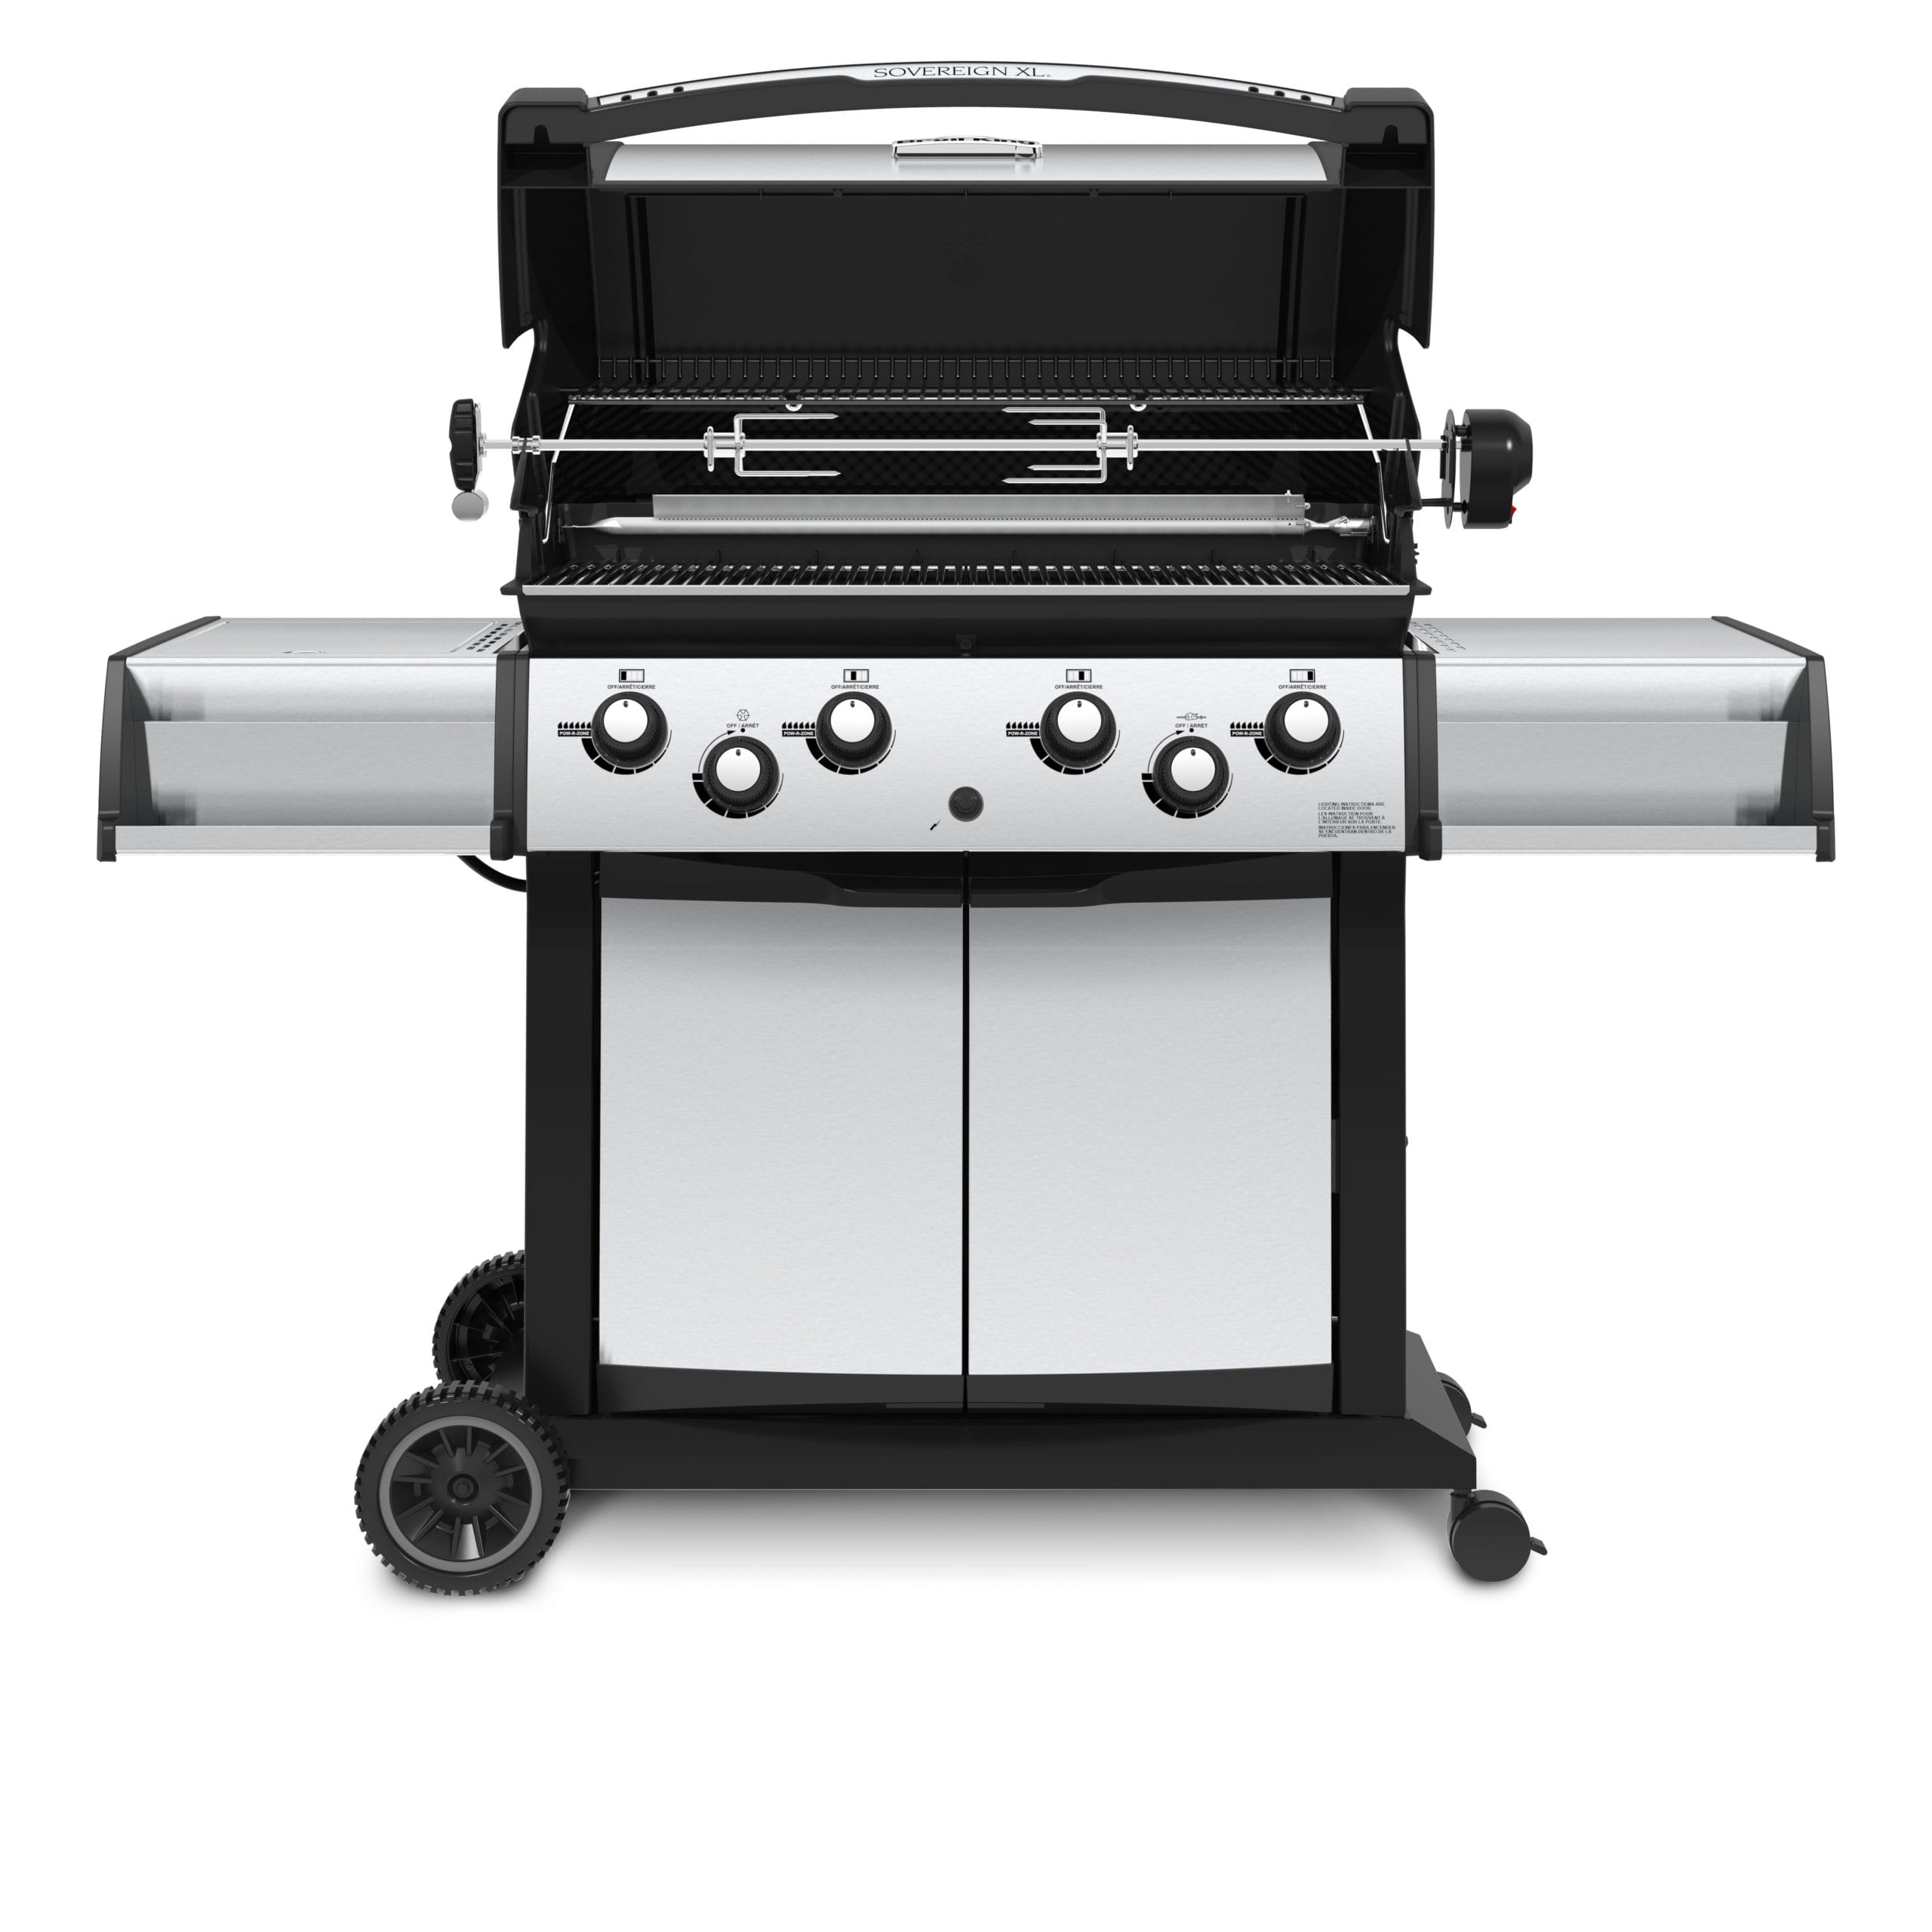 SovereignXLS90 Gas Grill by Broil King